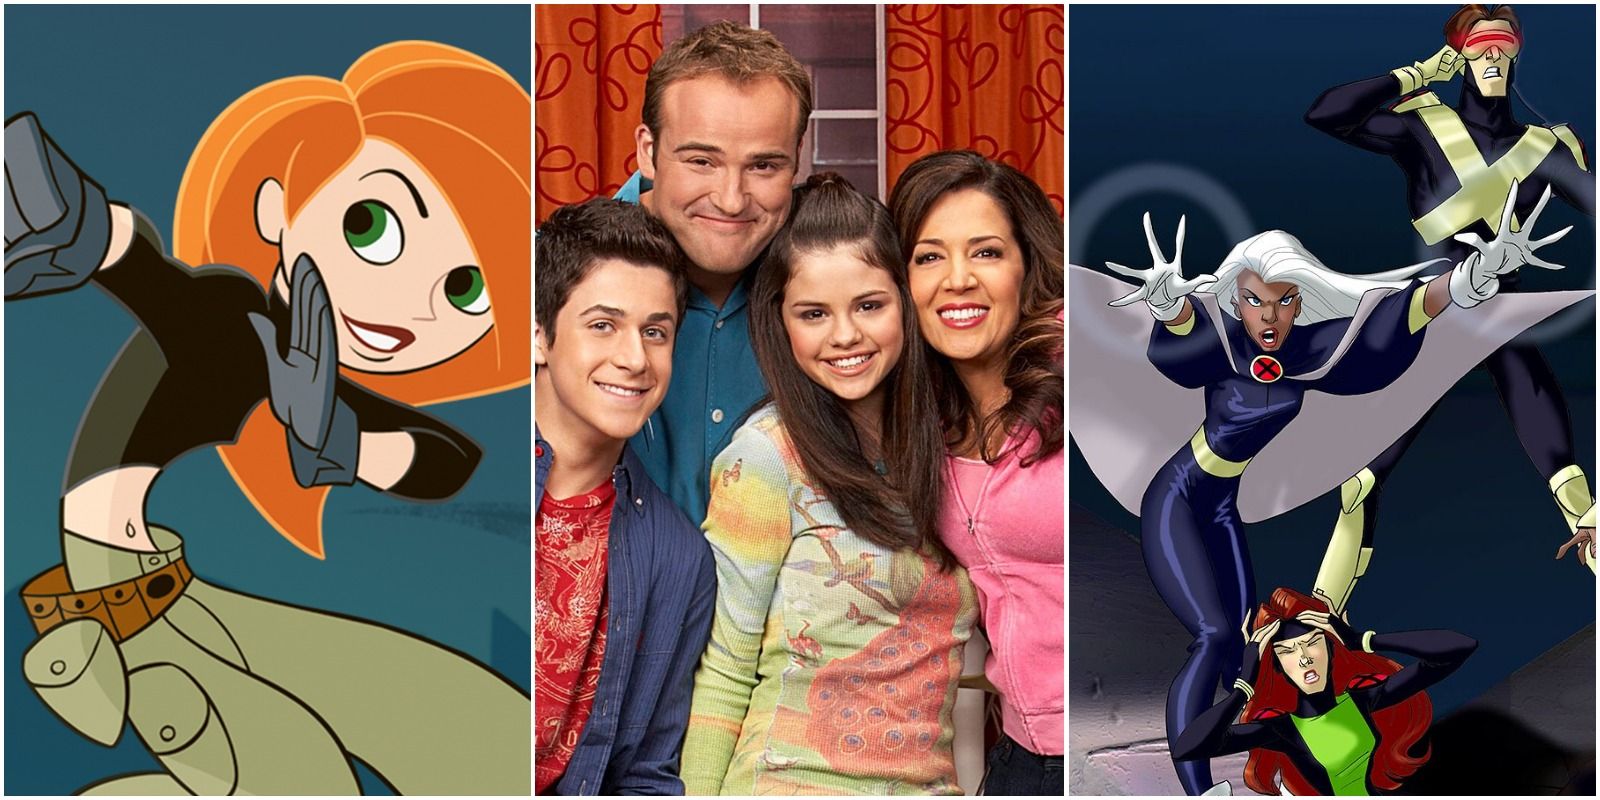 Top 10 Tv Shows From The 2000s On Disney+ To Watch, According To Imdb 5ED